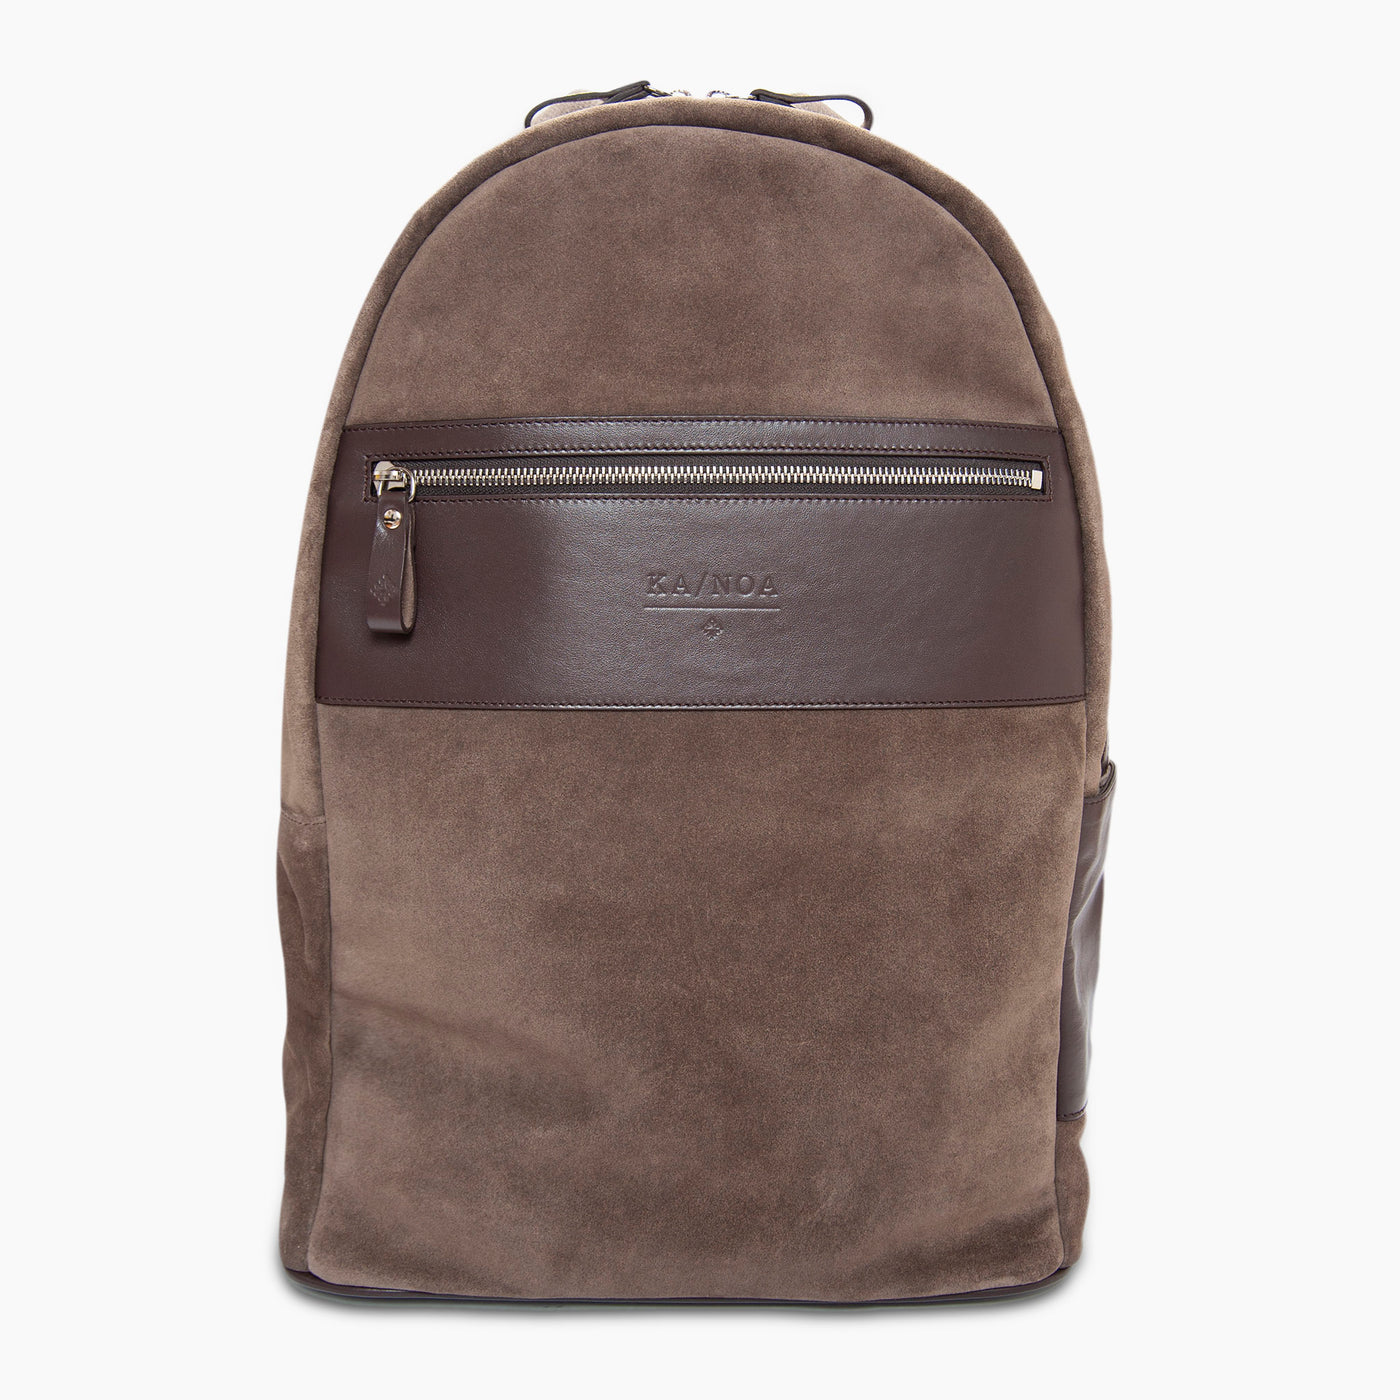 K-NOAH back pack in suede leather